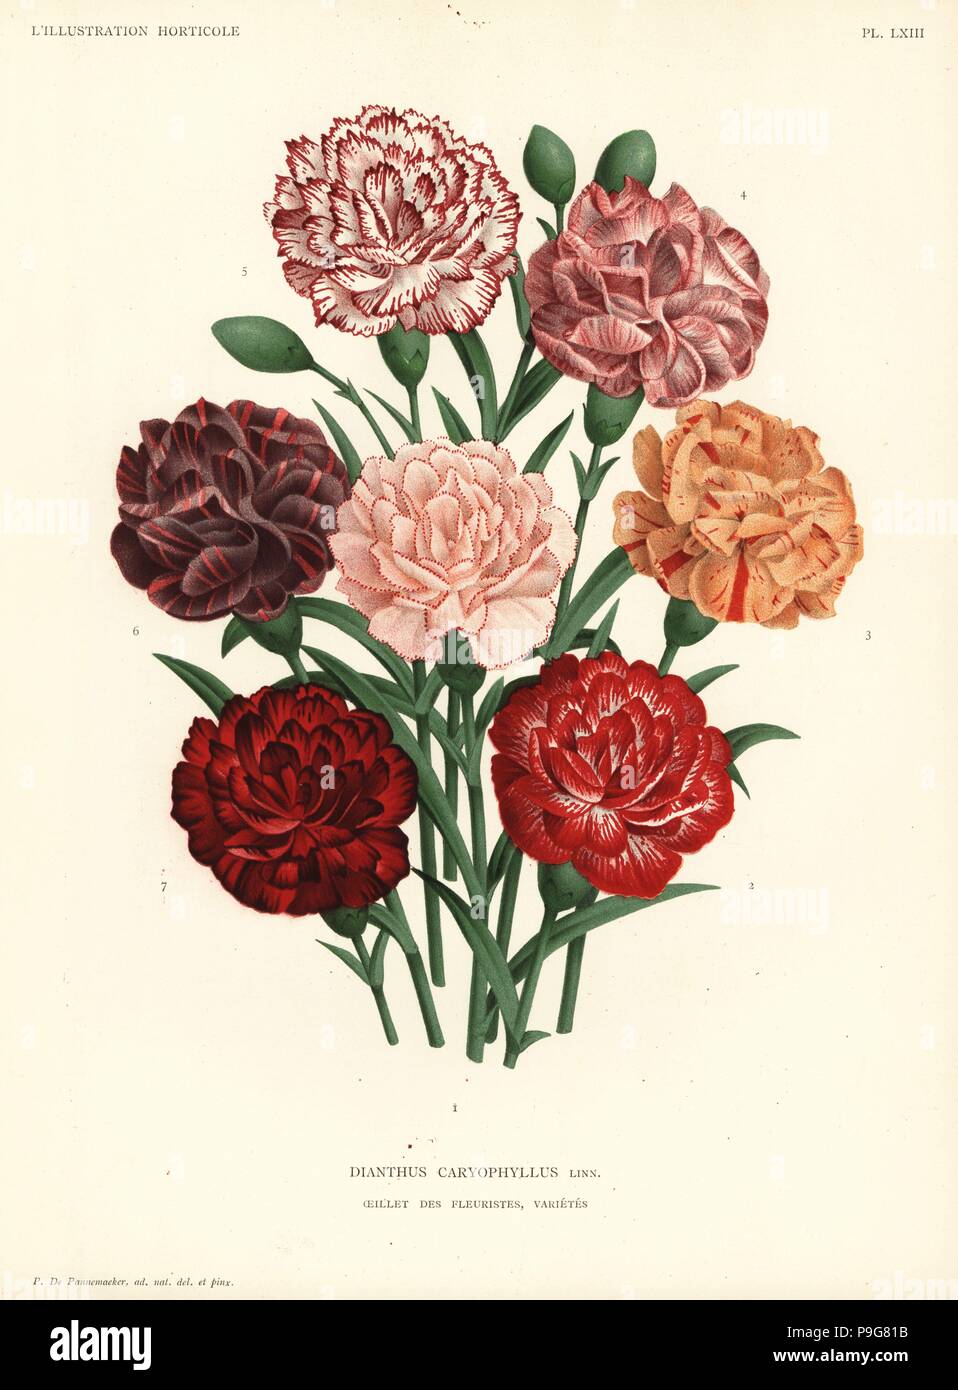 Carnation varieties, Dianthus caryophyllus. Drawn and chromolithographed by Pieter de Pannemaeker from Jean Linden's l'Illustration Horticole, Brussels, 1888. Stock Photo